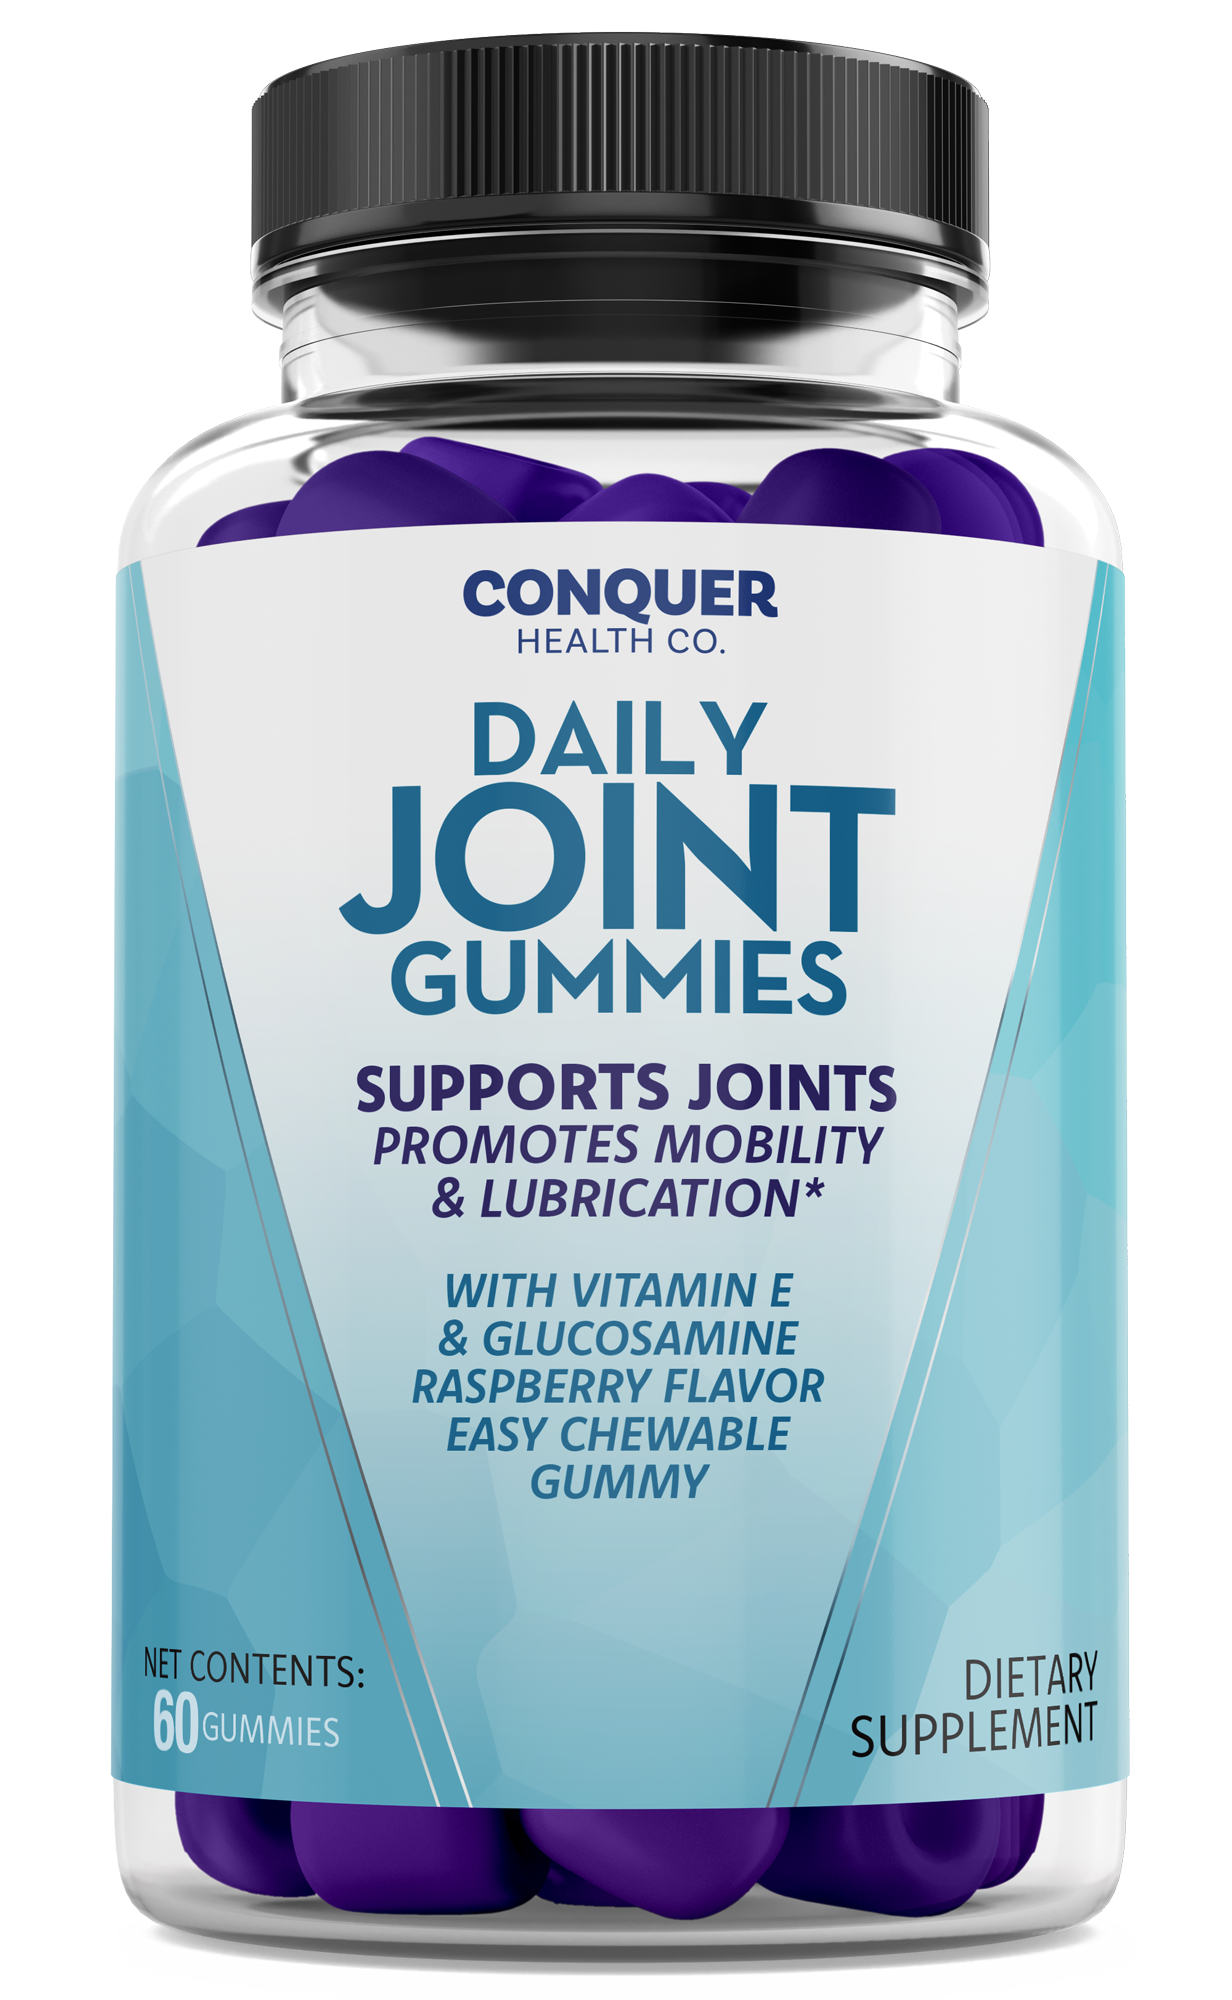 Daily Joint Gummies